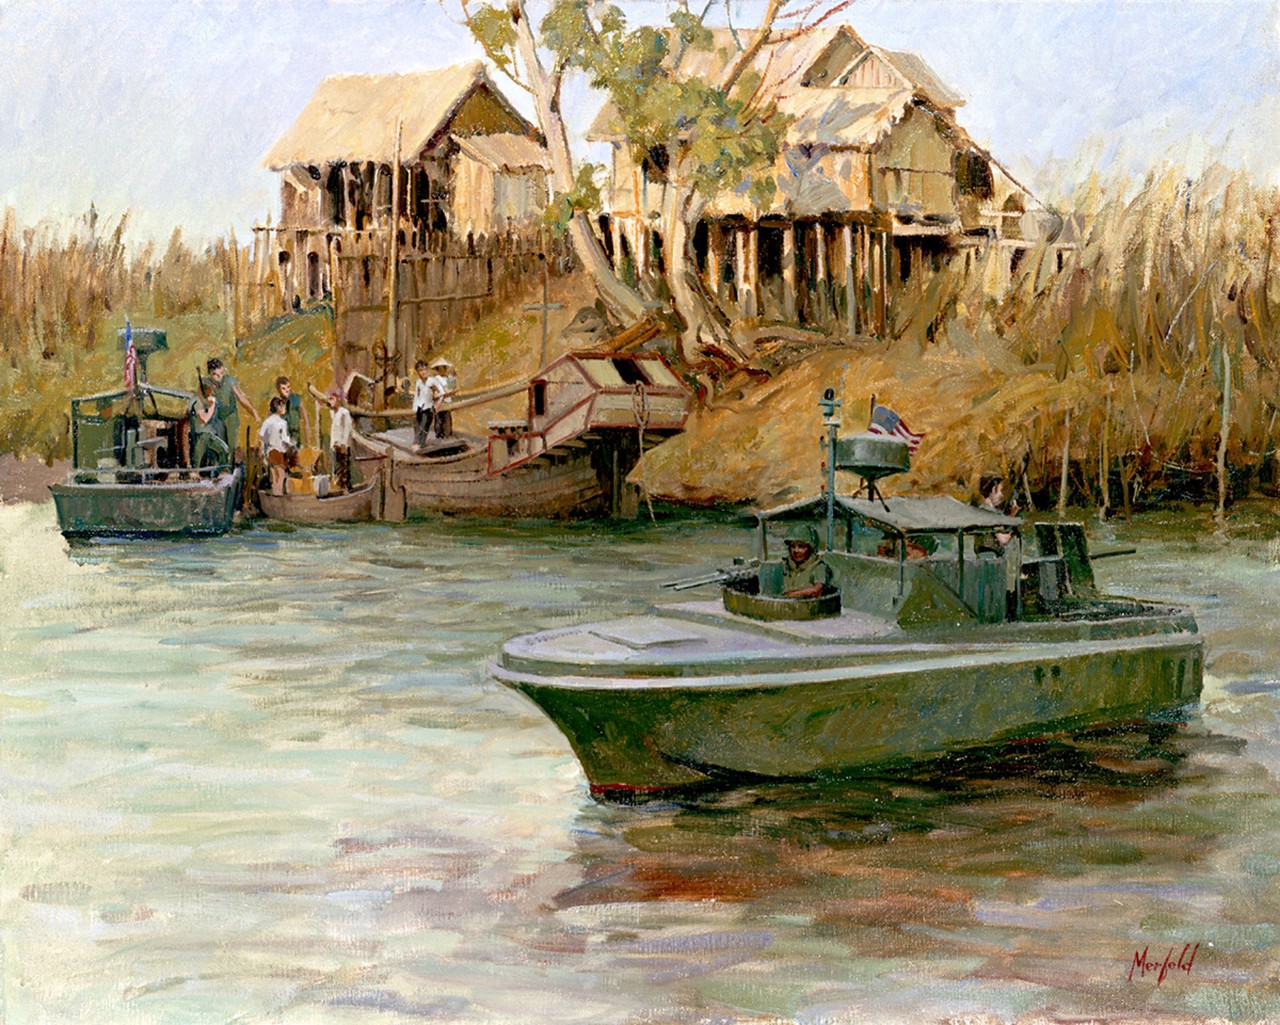 A small patrol boat on a river in front of a house